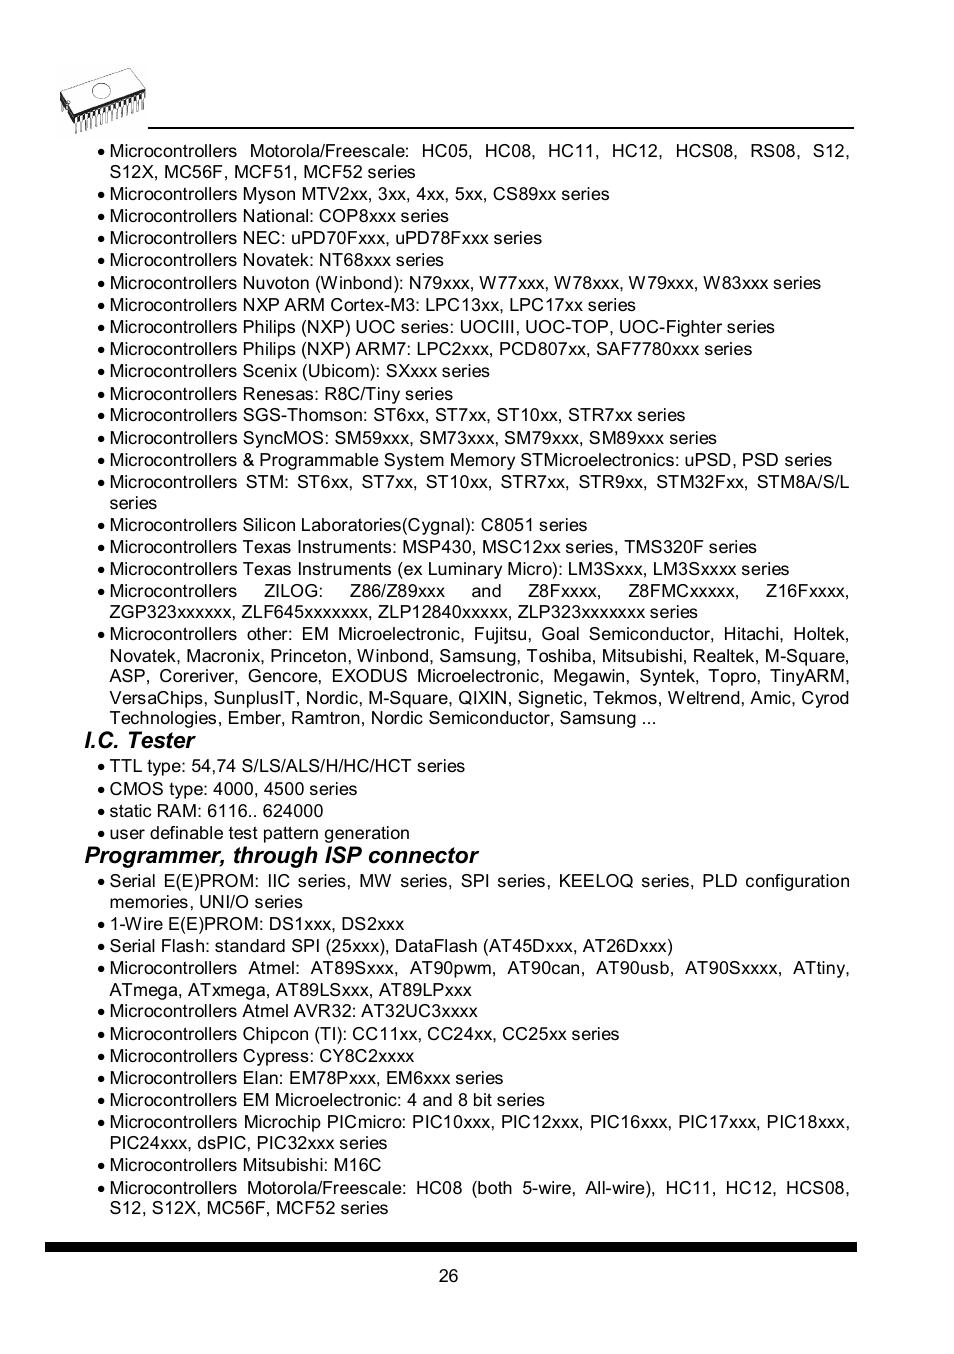 I.c. tester, Programmer, through isp connector | Dataman 40Pro User Manual  | Page 26 / 174